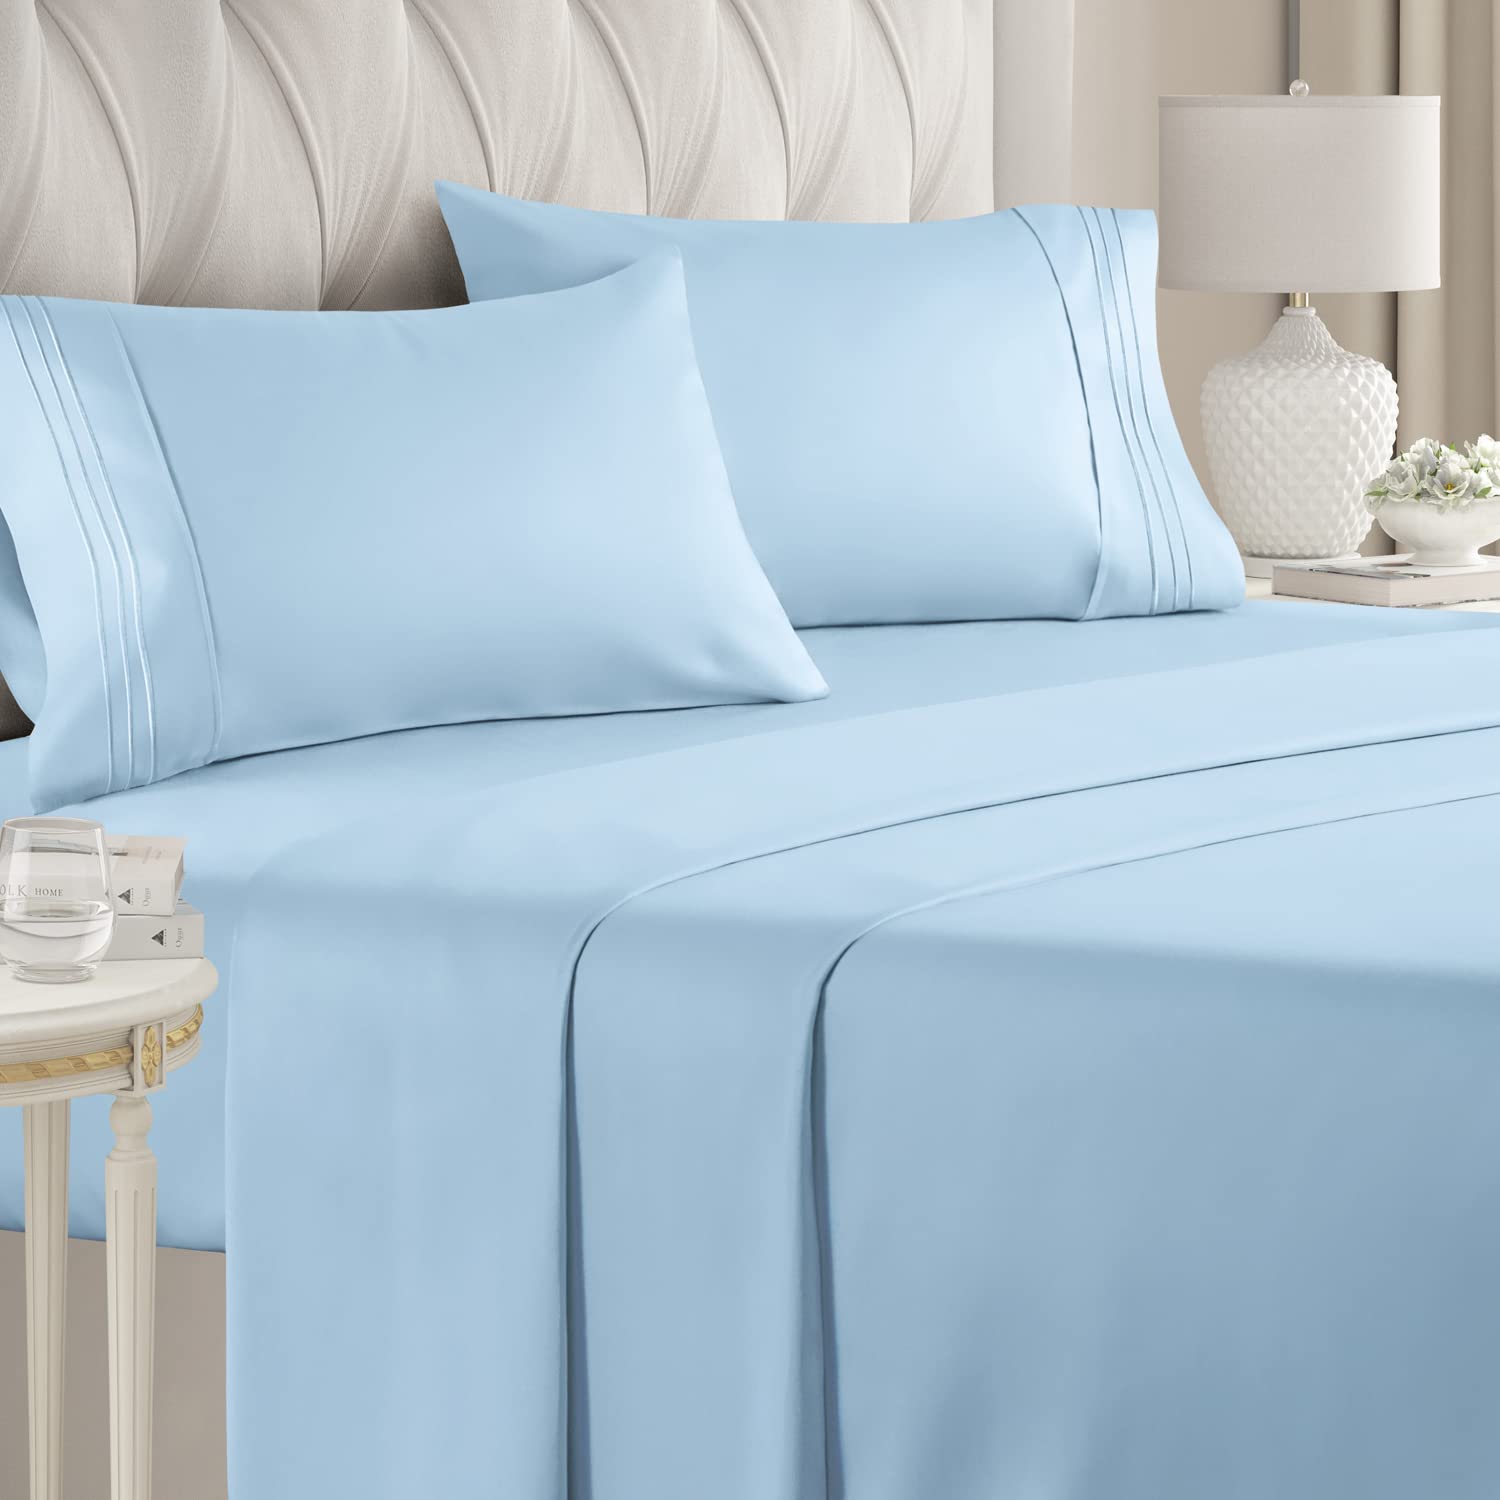 Book Cover 4 Piece Hotel Luxury Comfy Bed Sheets Set - Extra Soft - Deep Pockets - Easy Fit - Breathable & Cooling - Wrinkle Free(King Size, Light Blue) 18 - Baby Blue King